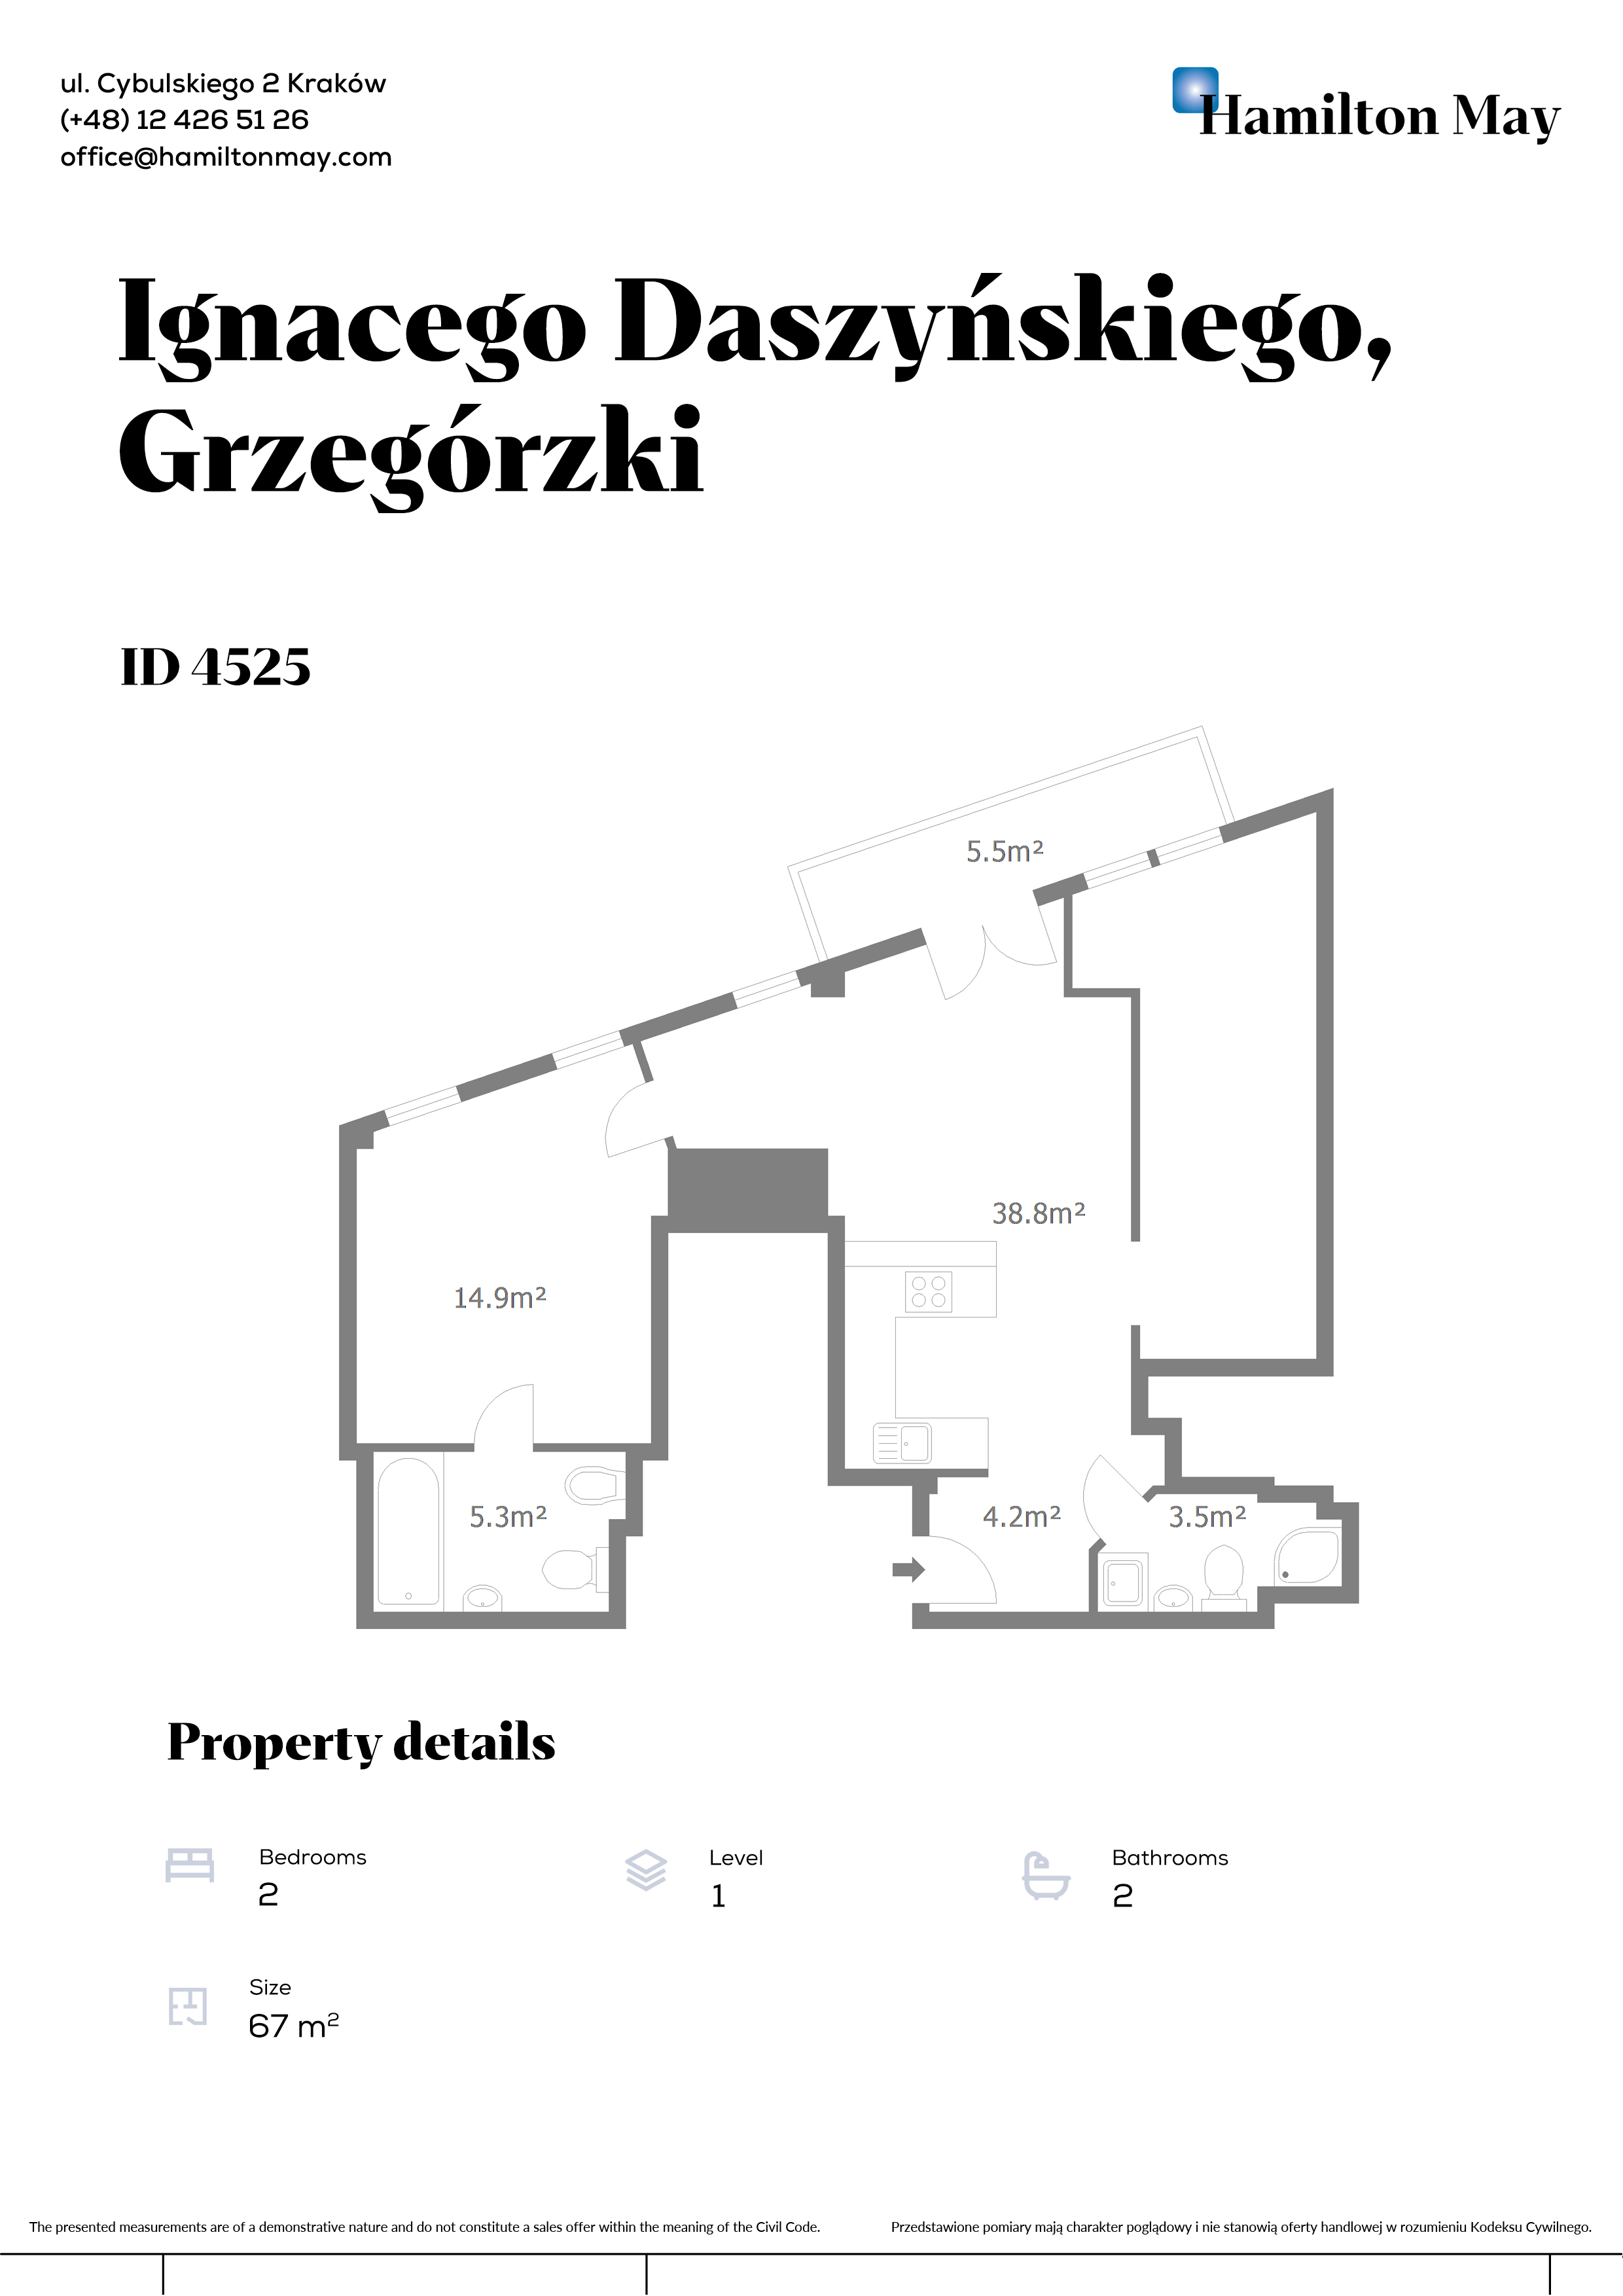 A 2-bedroom apartment in a modern residential building in the center of Krakow on Daszyńskiego Avenue, next to medical university - plan